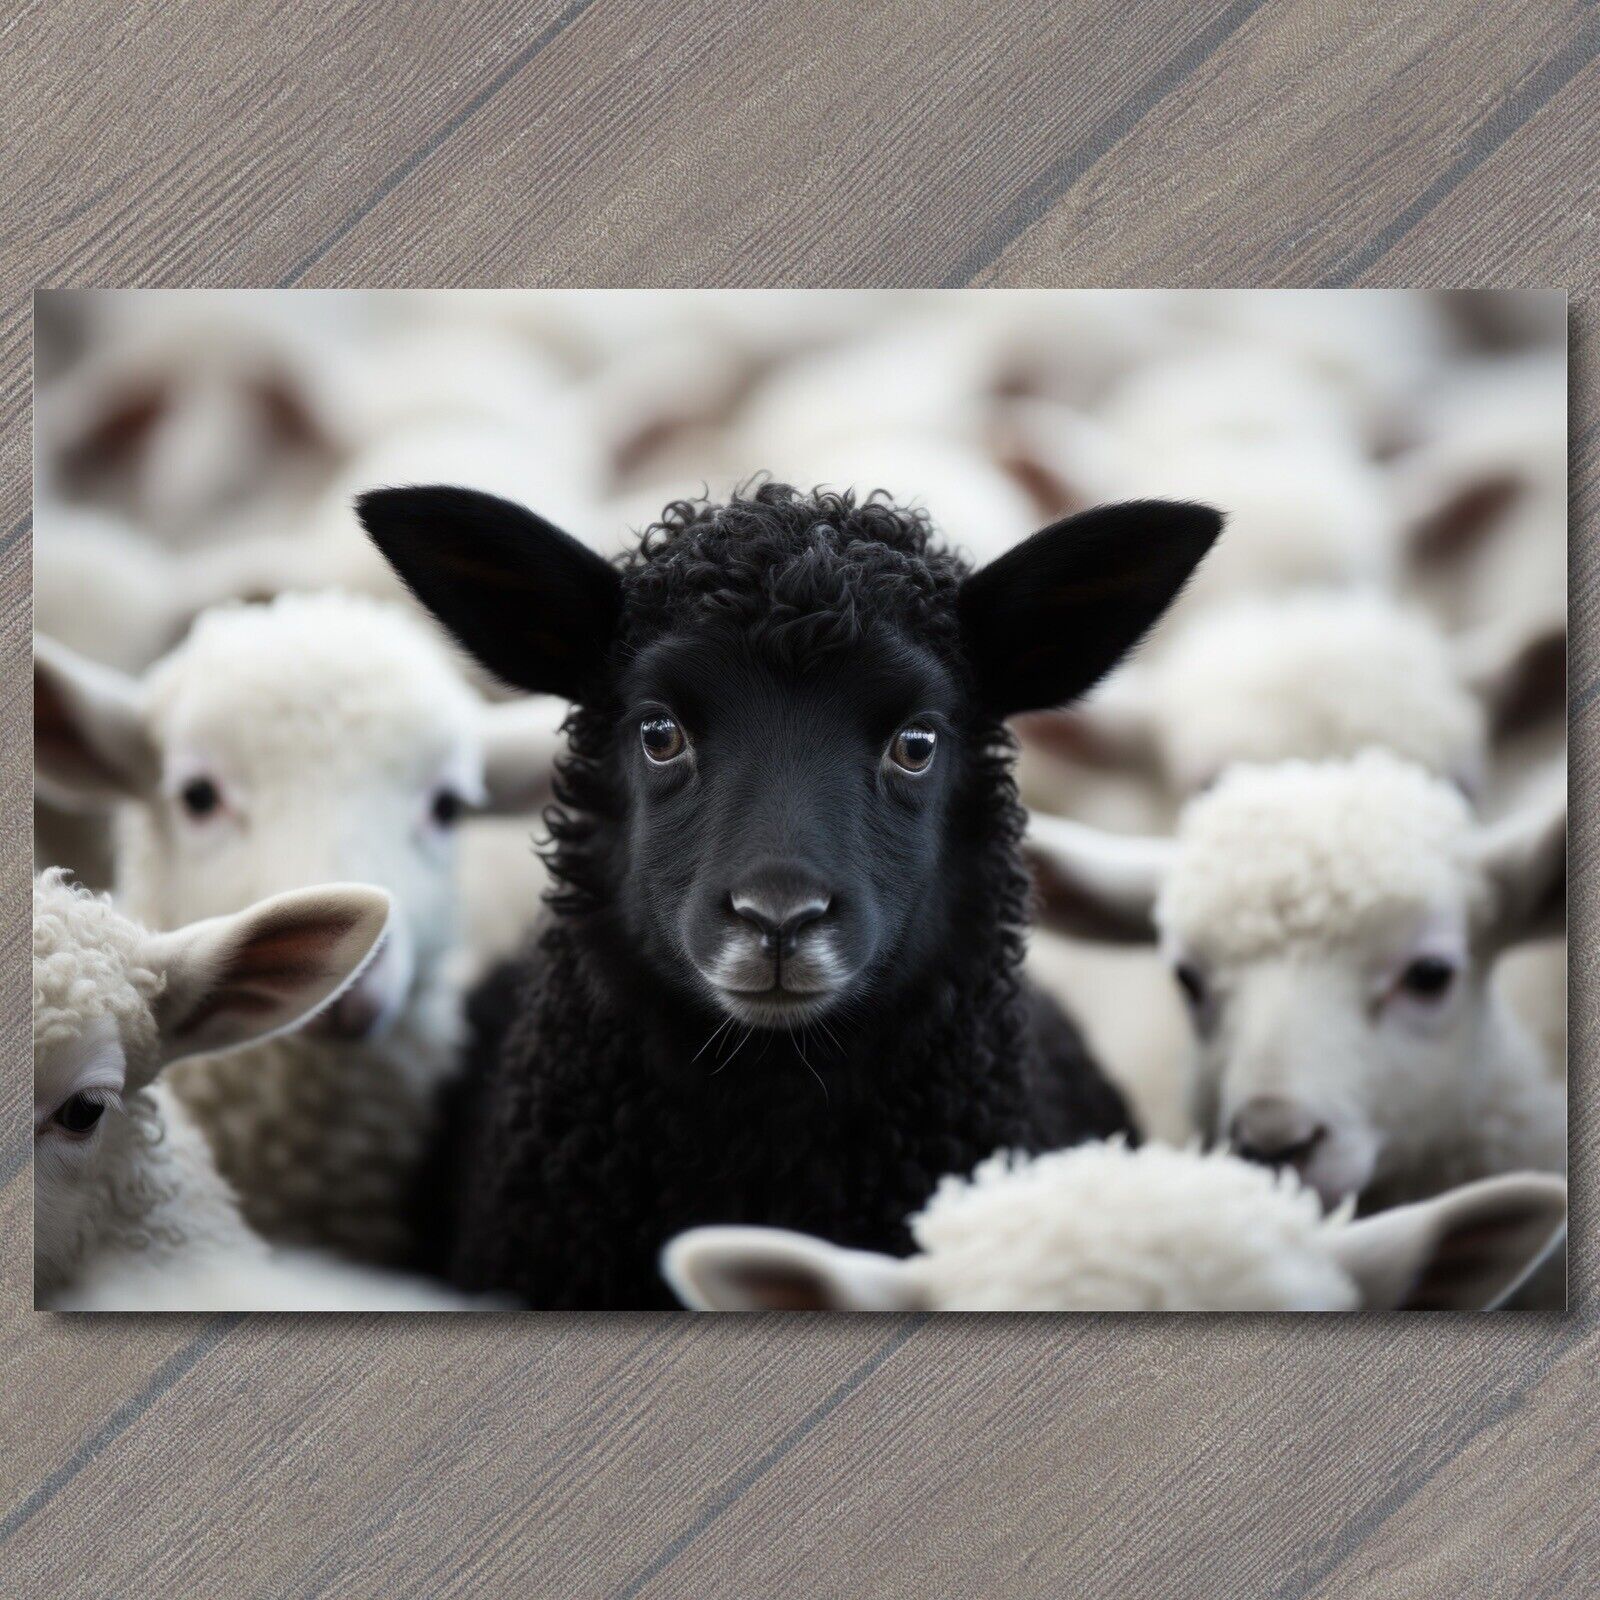 POSTCARD: Lone Black Sheep - A Standout in a Sea of White Flock 🐑🖤